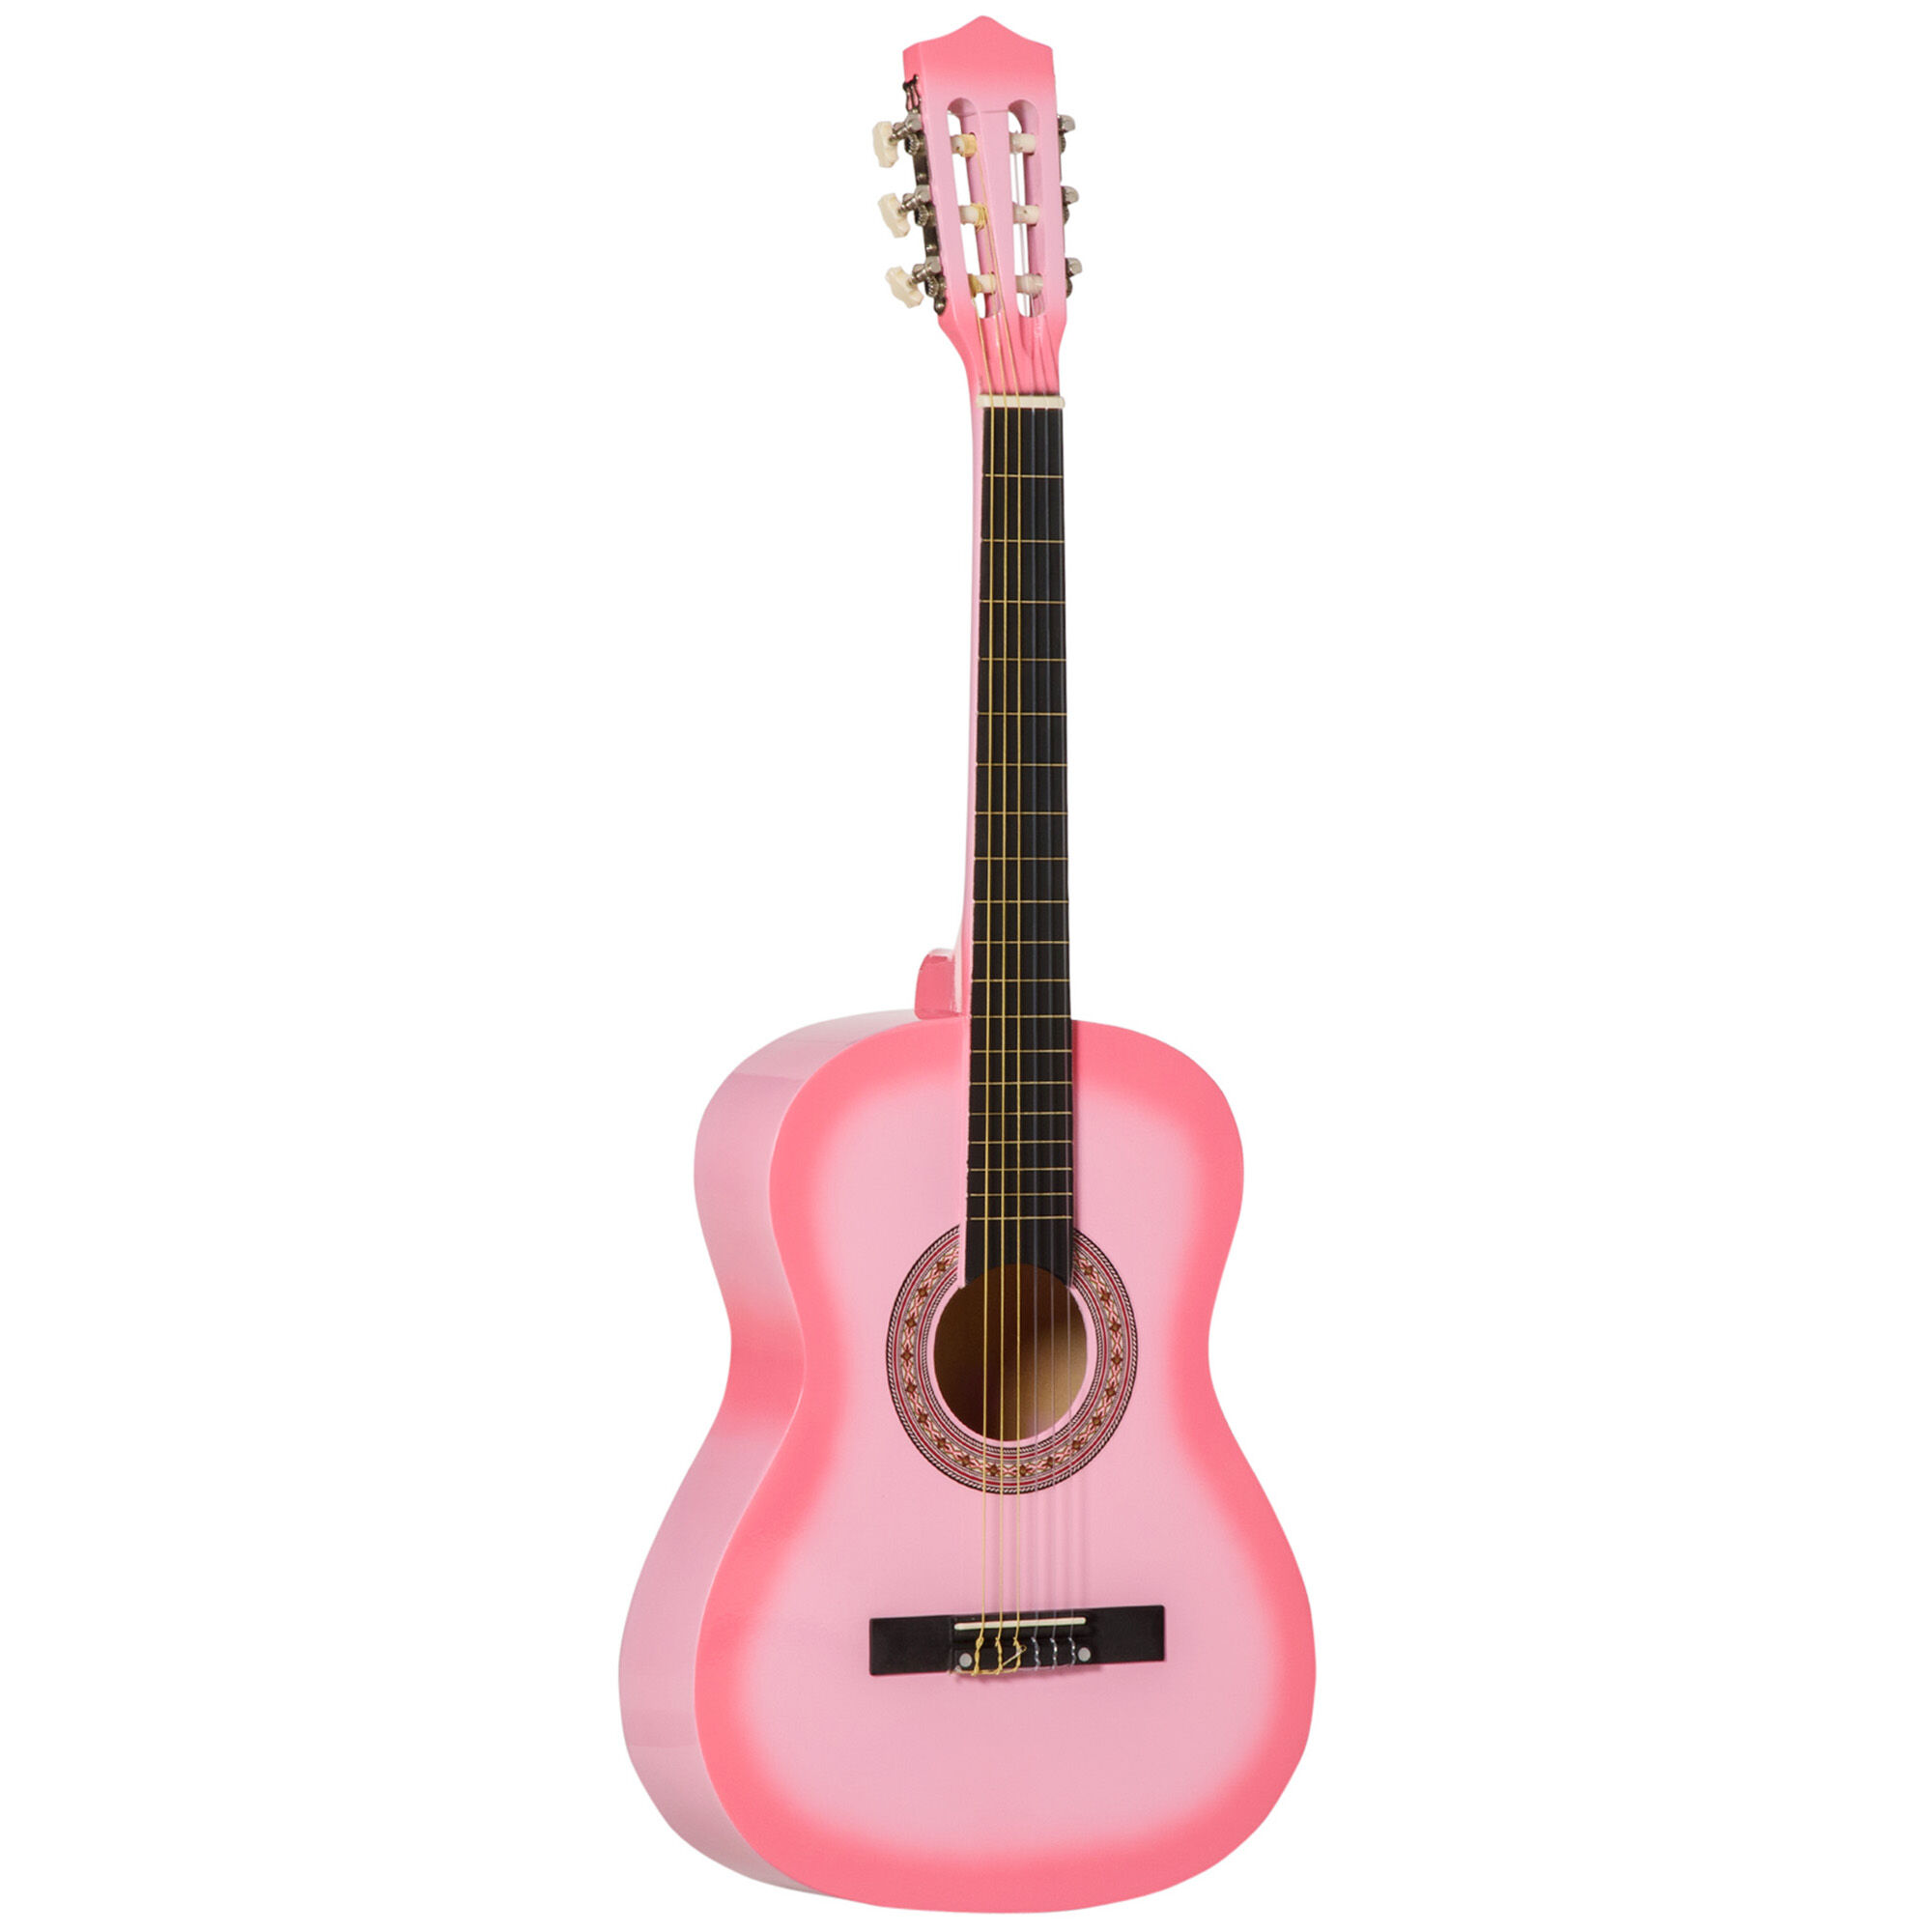 Soozier 36" Classical Guitar Birch Wood Guitar Set with Gig Bag, Tuner, Strap, Strings, Picks, String Winder, for Child Beginners, Pink